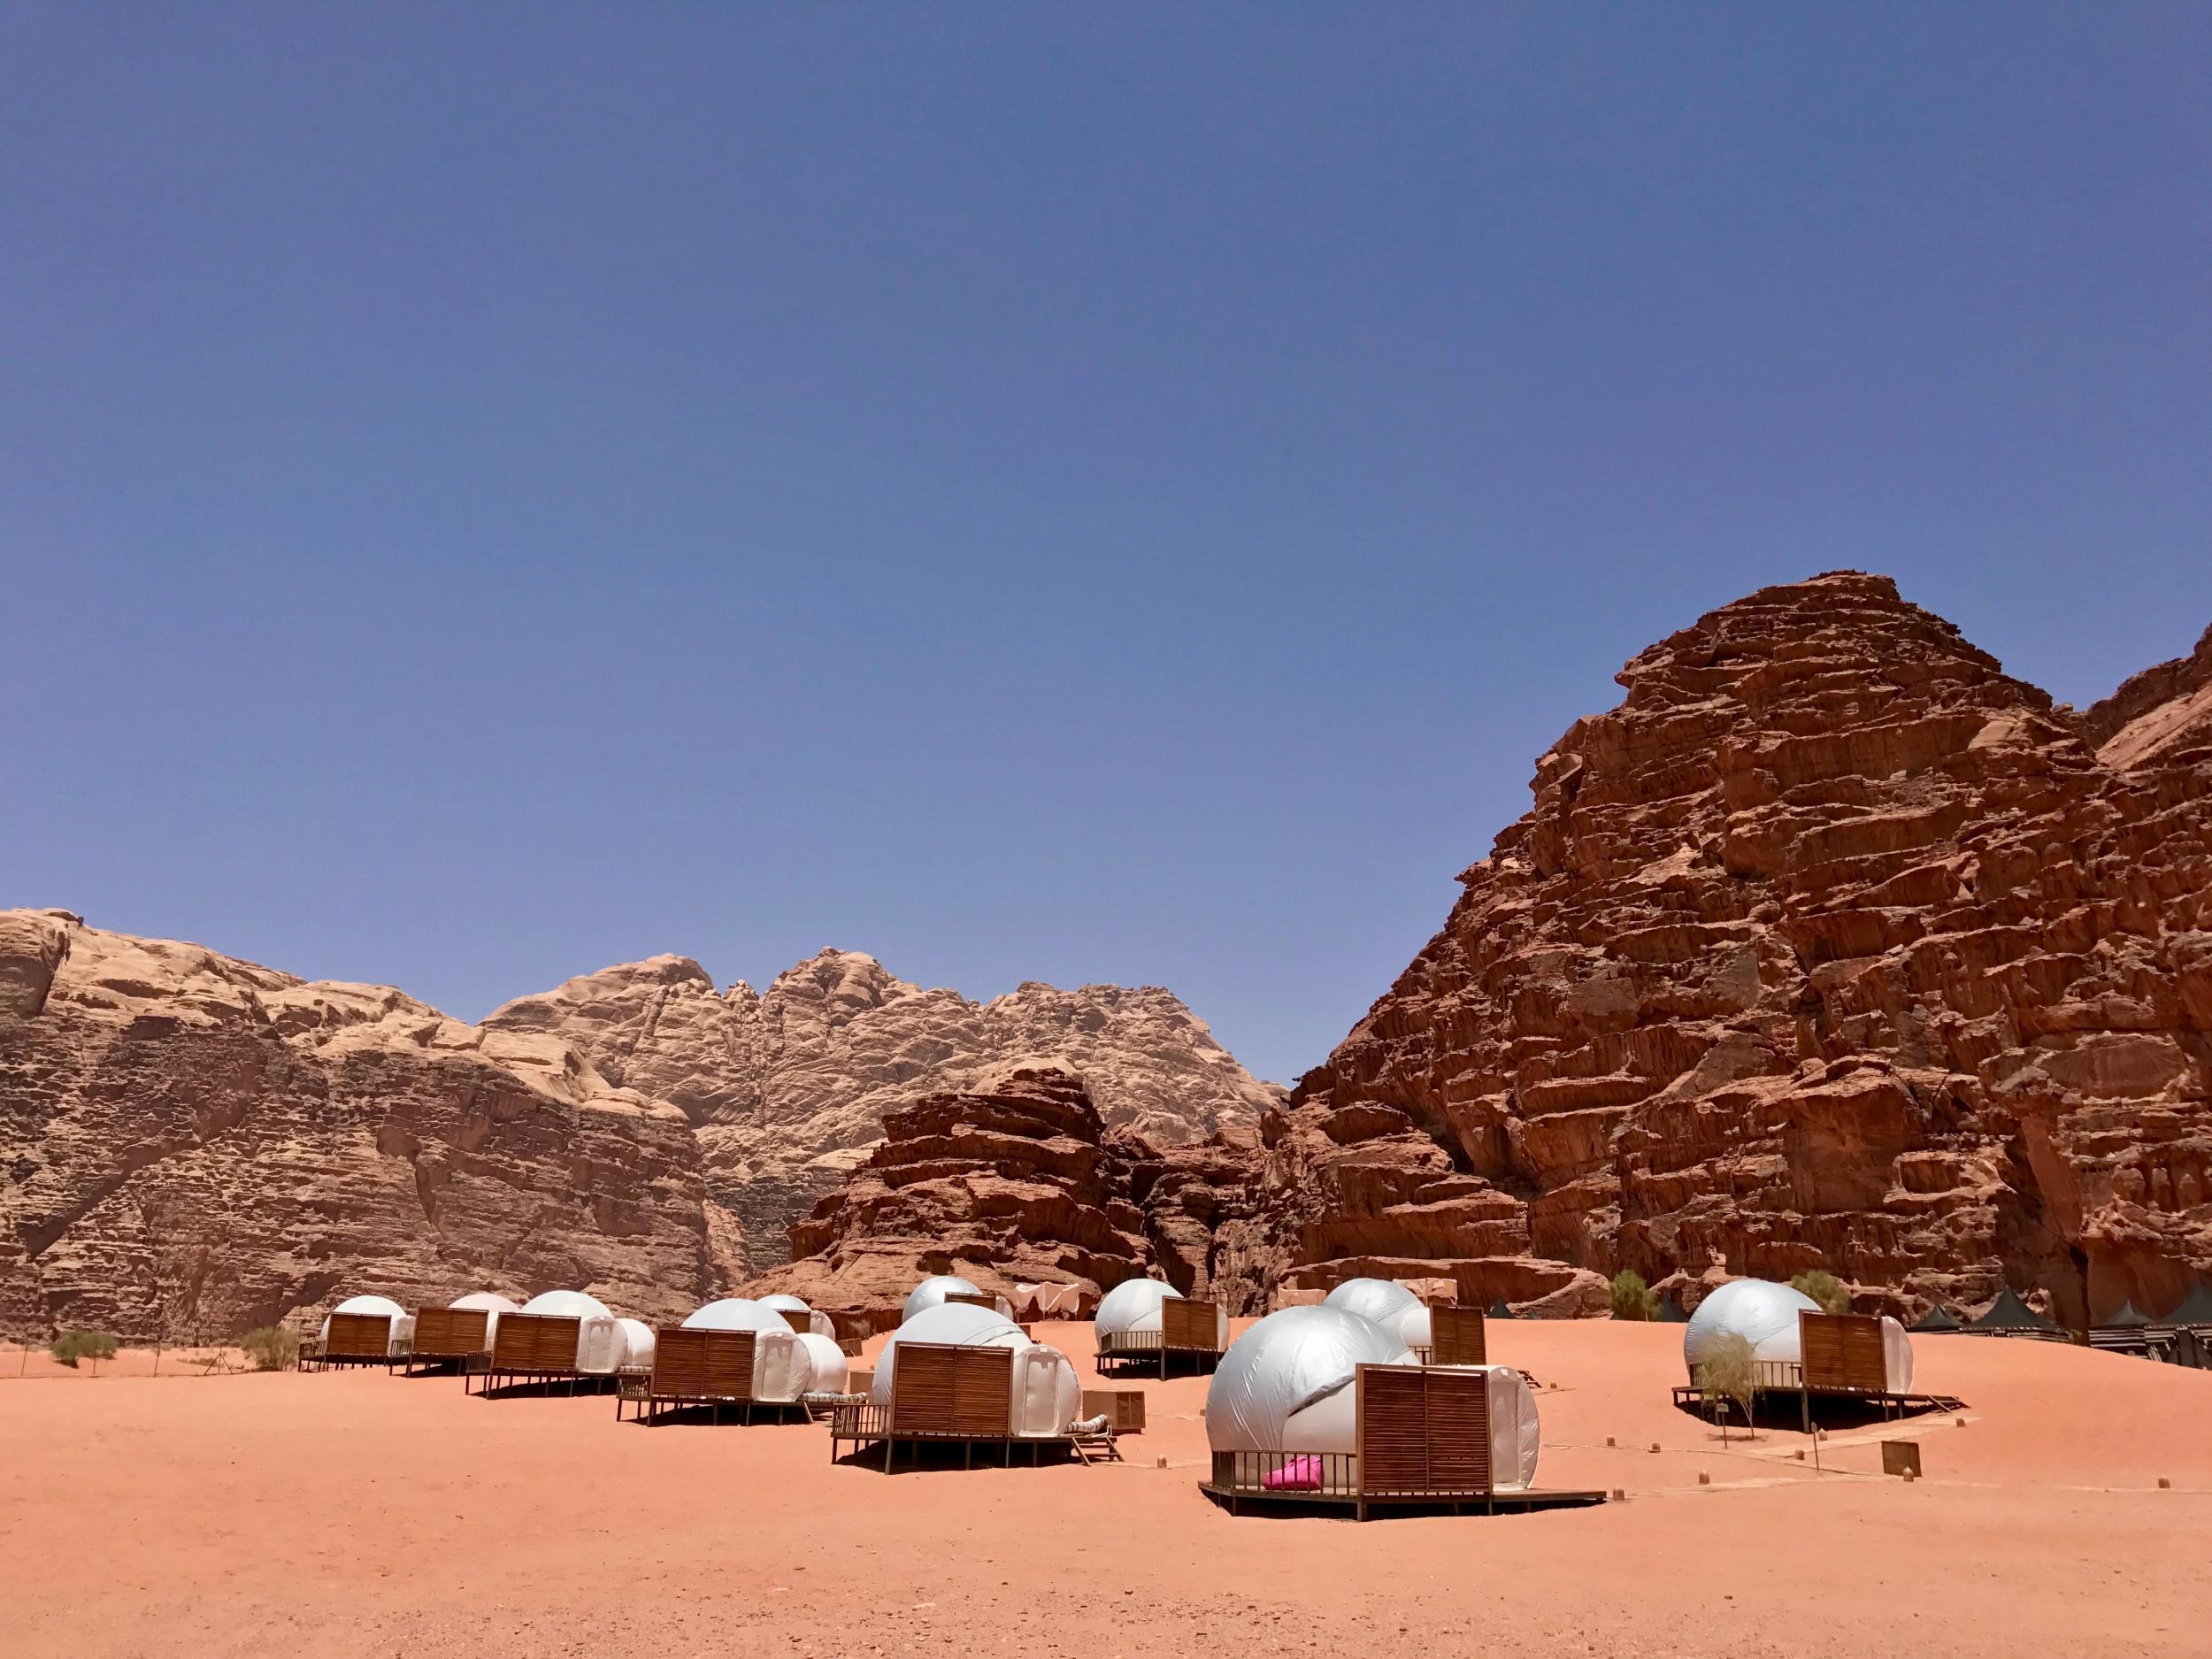 Only in Jordan can you stay in futuristic pods in the middle of the desert